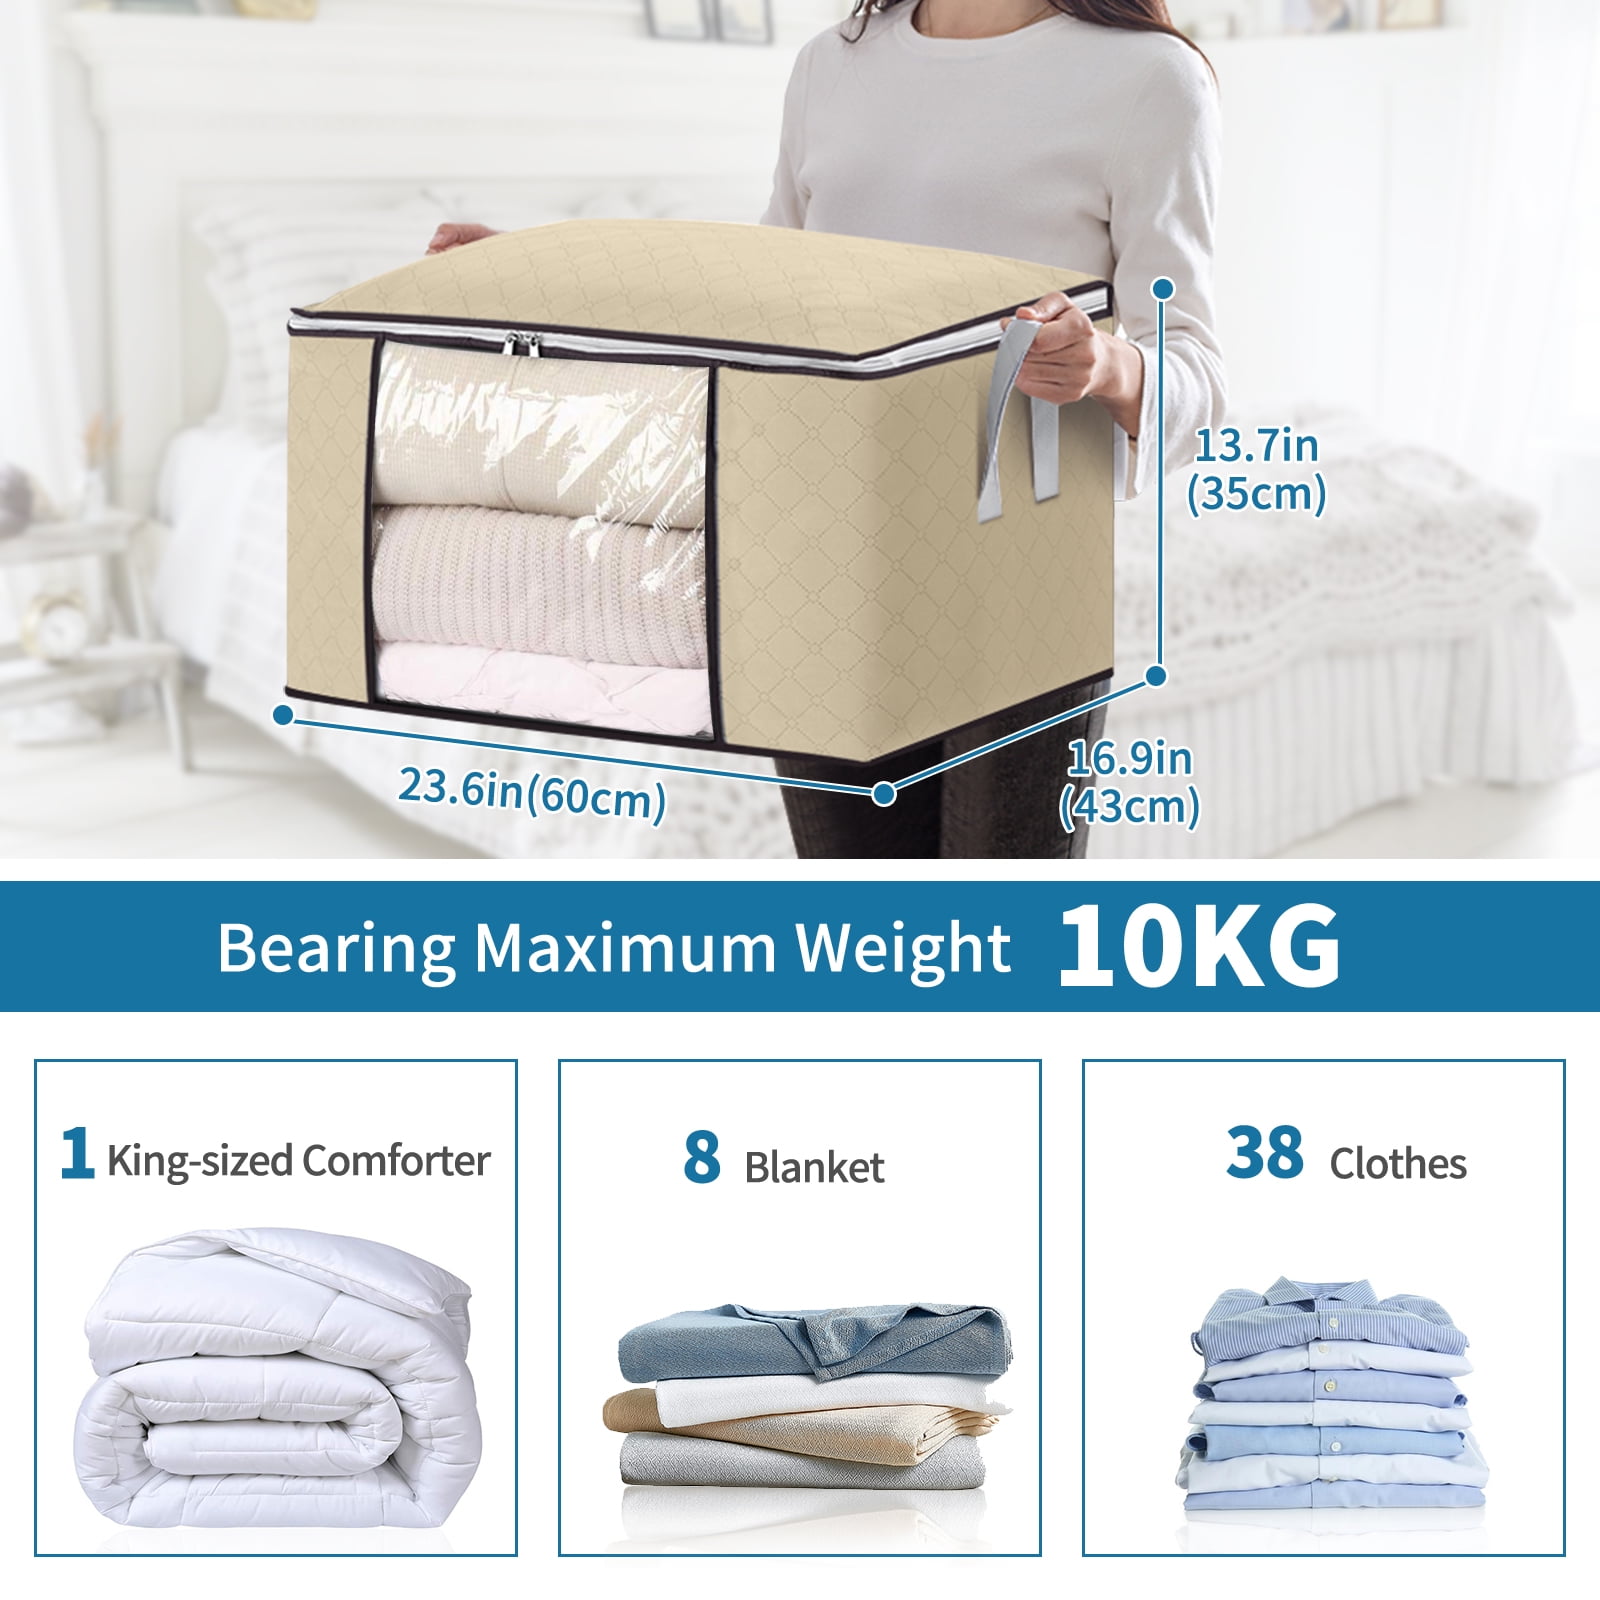 Storage Bags for Clothes, 4PCS Closet Organizers and Storage Bags, 90L  Large Capacity Clothing Storage Bags with Clear Window, 3 Layer Fabric Storage  Bags for Clothes, Blankets, Comforters and Bedding 